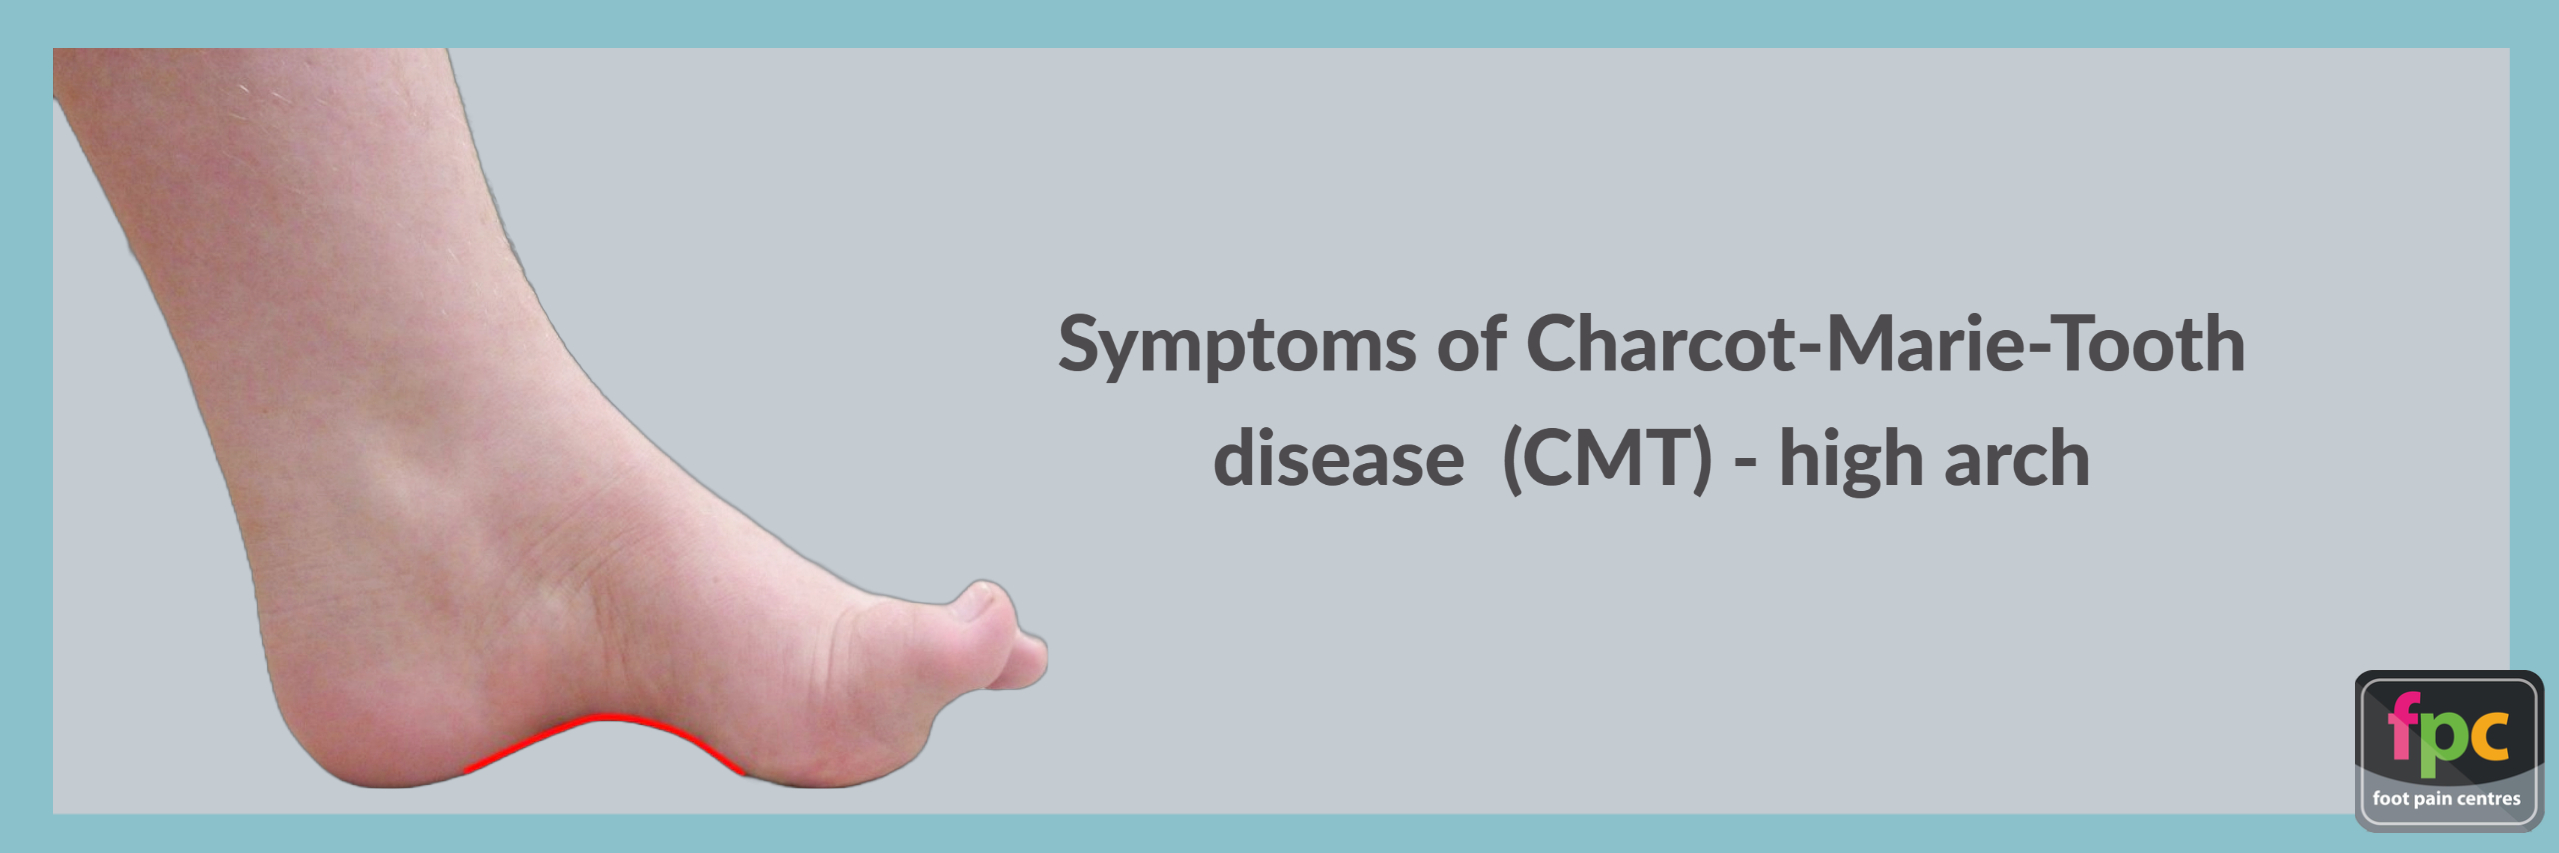 charcot marie tooth symptoms